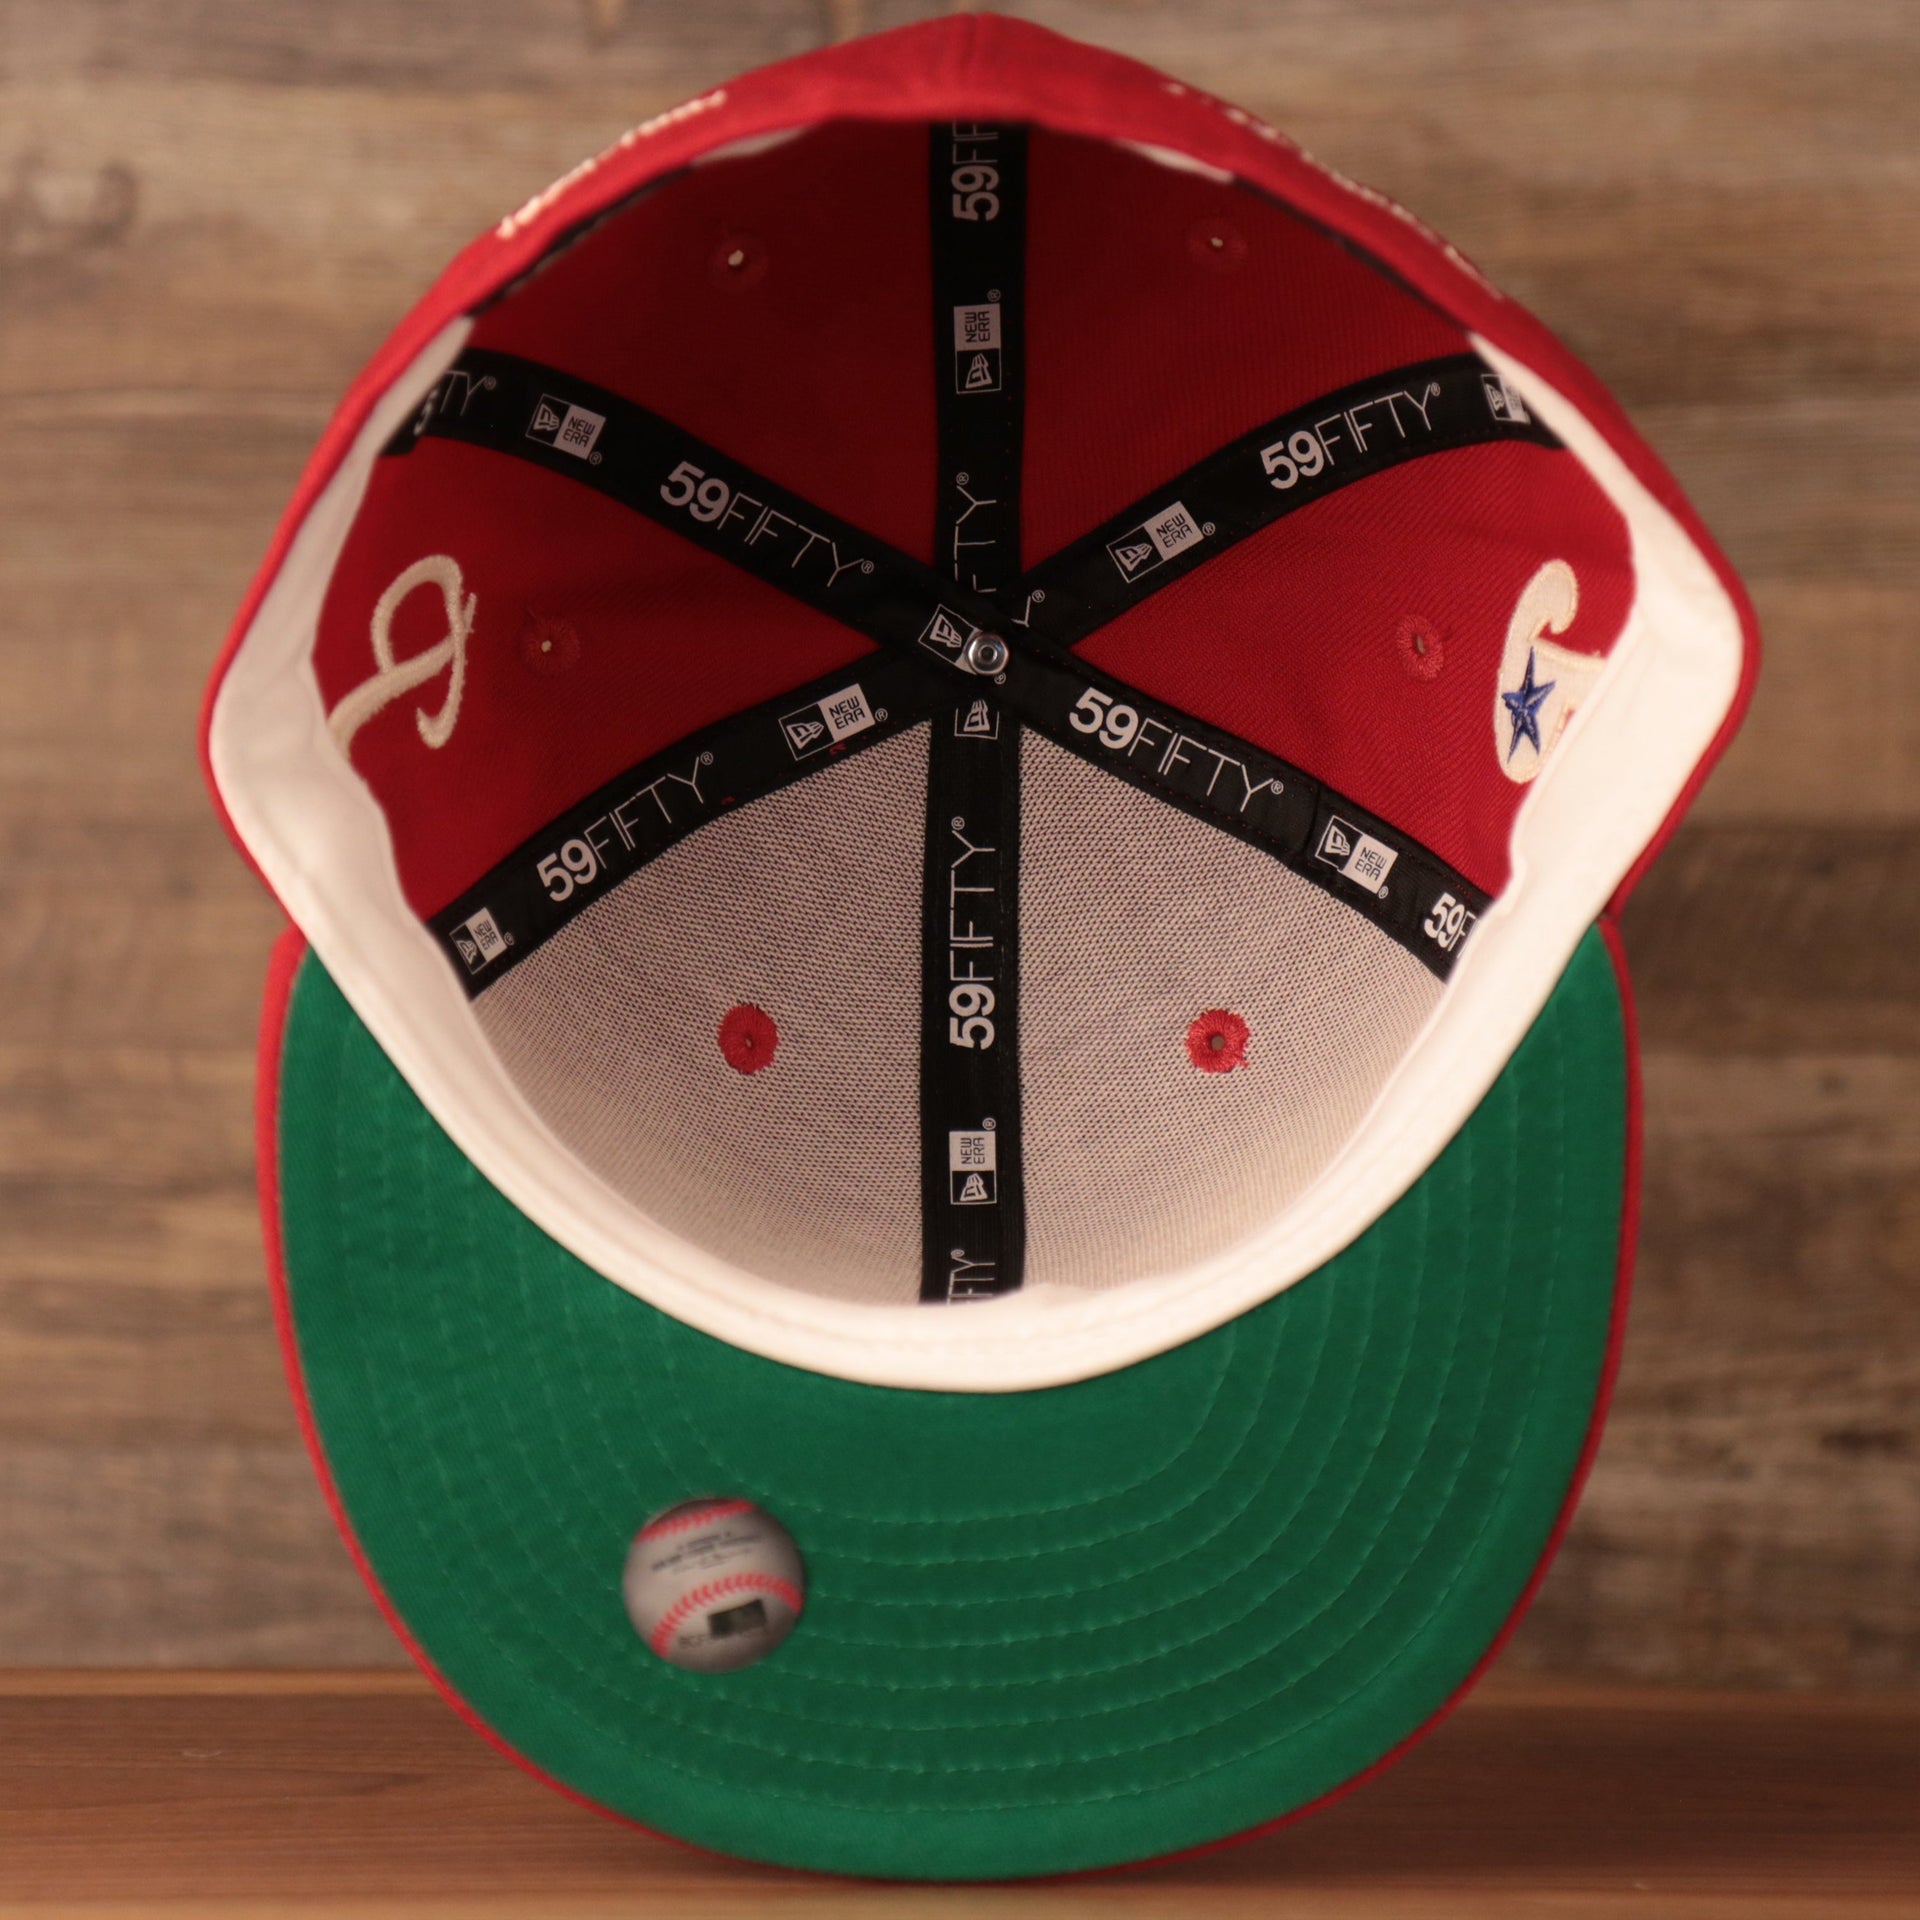 The red 59fifty has a green underbrim which adds to the funky look of this vintage 59fifty by New Era.